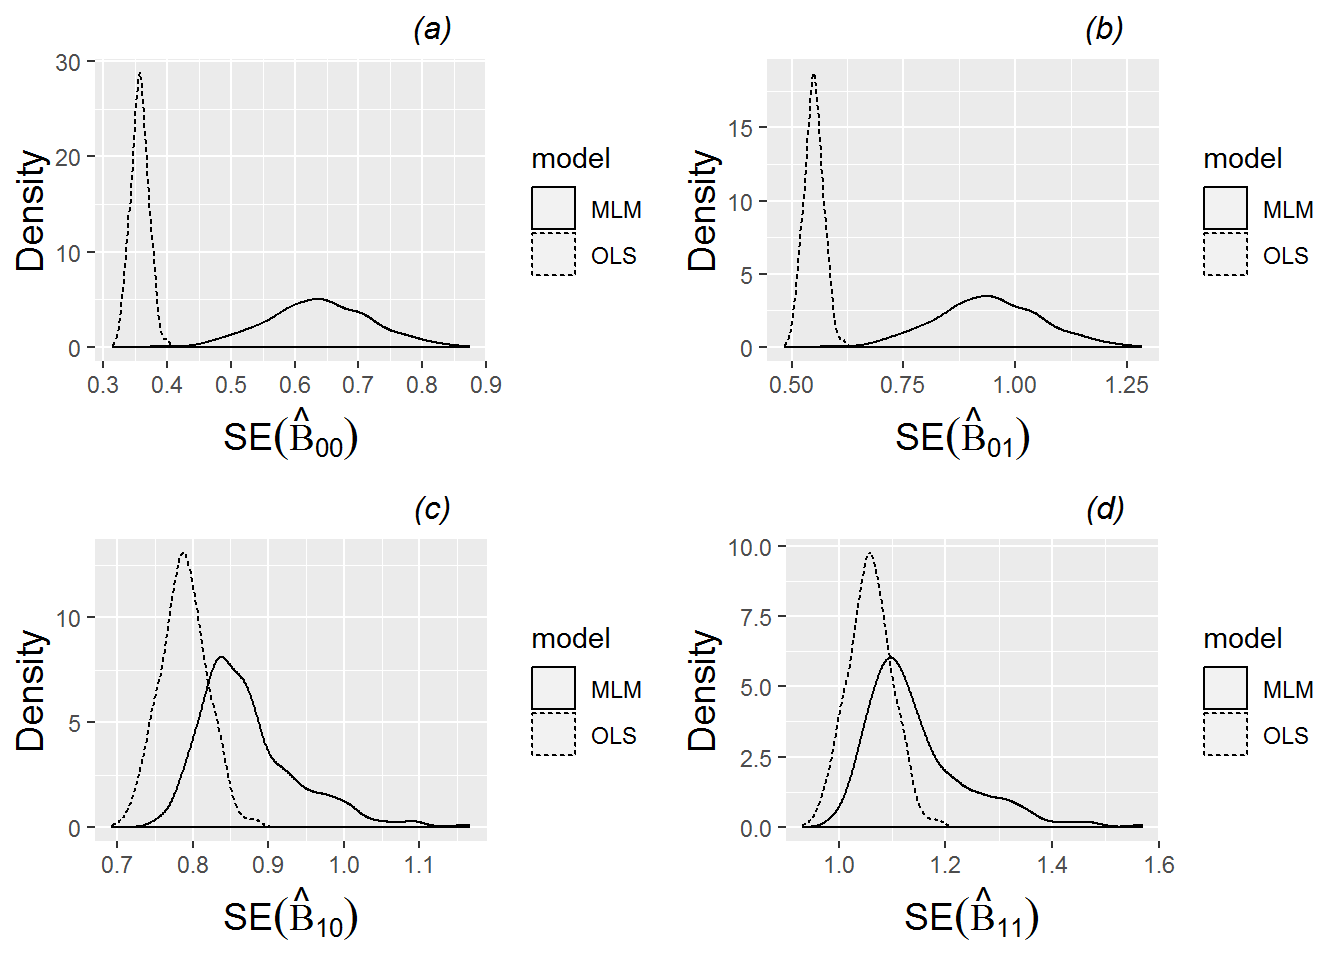 Density plots of standard errors of parameter estimates for the four fixed effects of Model C under both a multilevel model and OLS regression. 1000 sets of simulated data for the 37 subjects in our study were produced using estimated fixed and random effects from Model C. For each set of simulated data, estimates of (a) SE(\(\alpha_{0}\)), (b) SE(\(\alpha_{1}\)), (c) SE(\(\beta_{0}\)), and (d) SE(\(\beta_{1}\)) were obtained using both a multilevel and an OLS regression model. Each plot then shows a density plot for the 1000 estimates of the corresponding standard error term using multilevel modeling vs. a similar density plot for the 1000 estimates using OLS regression.